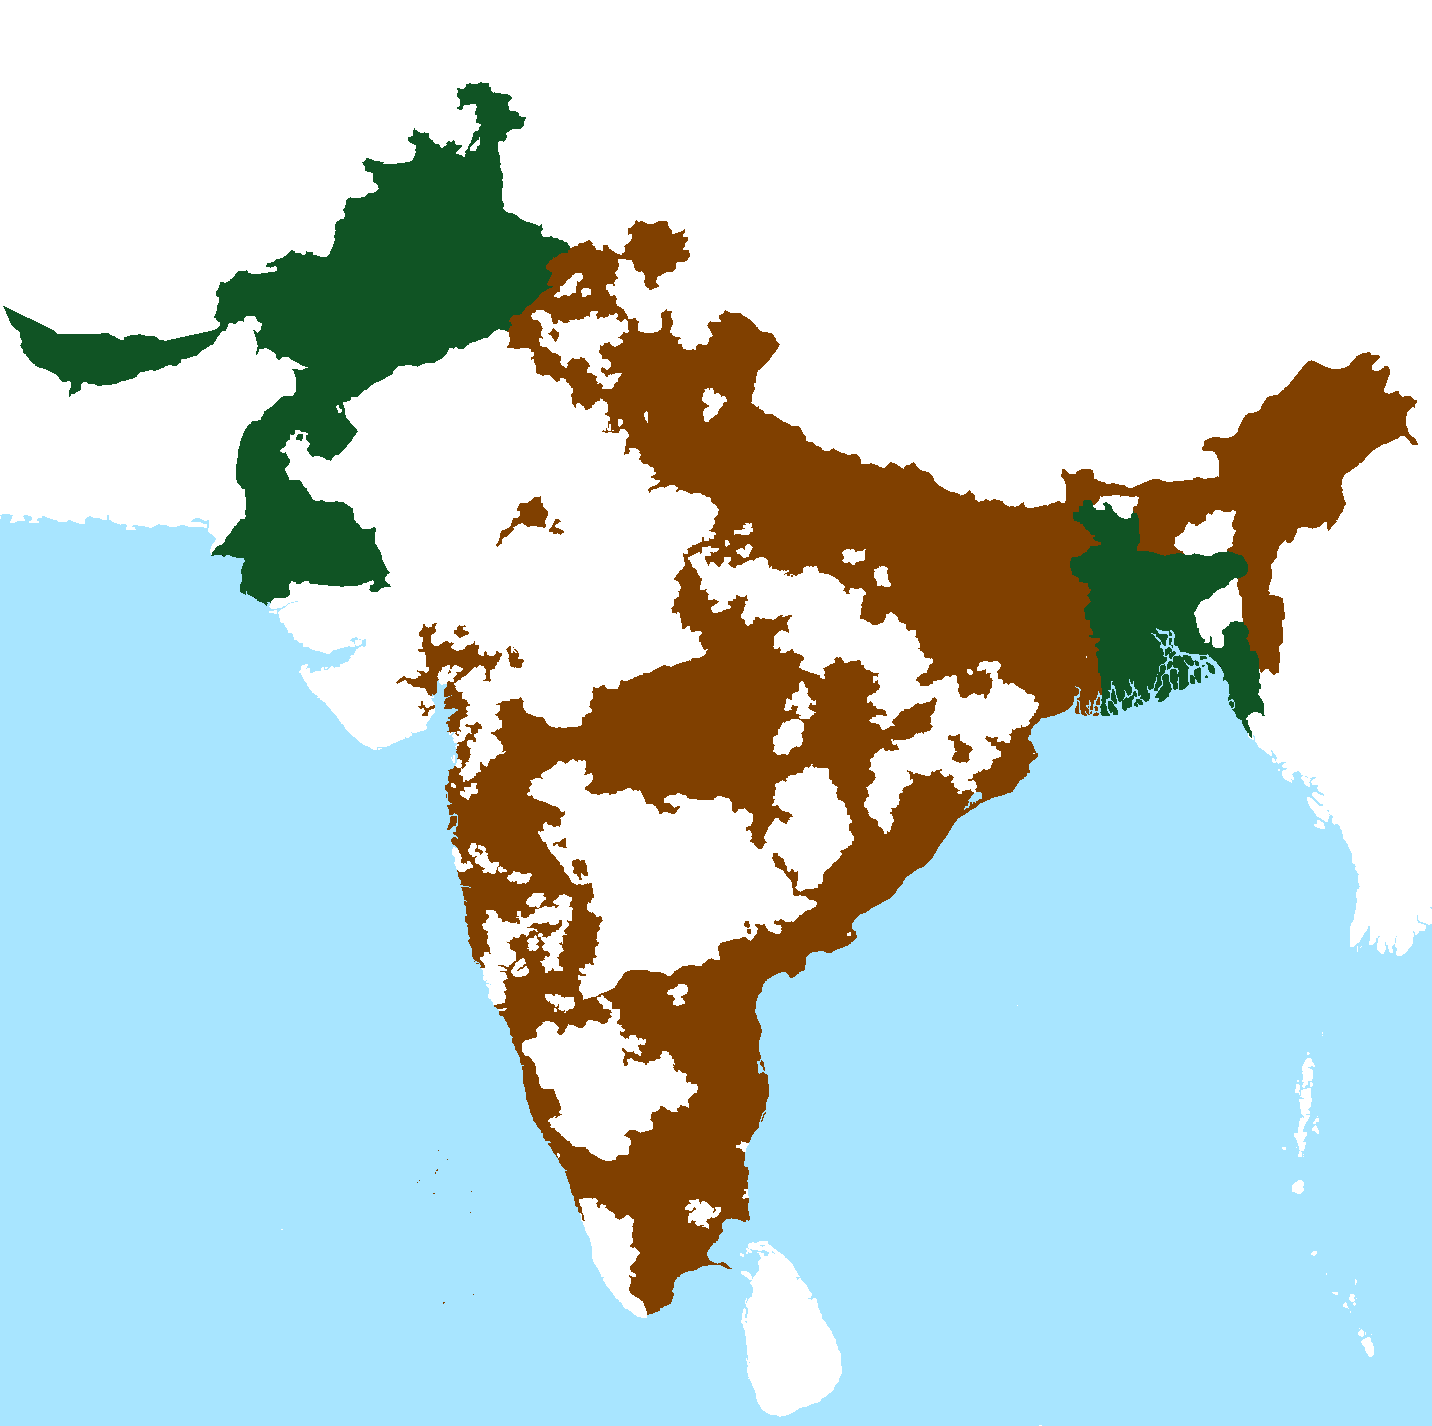 India_%26_Pakistan_on_eve_of_Independence.png